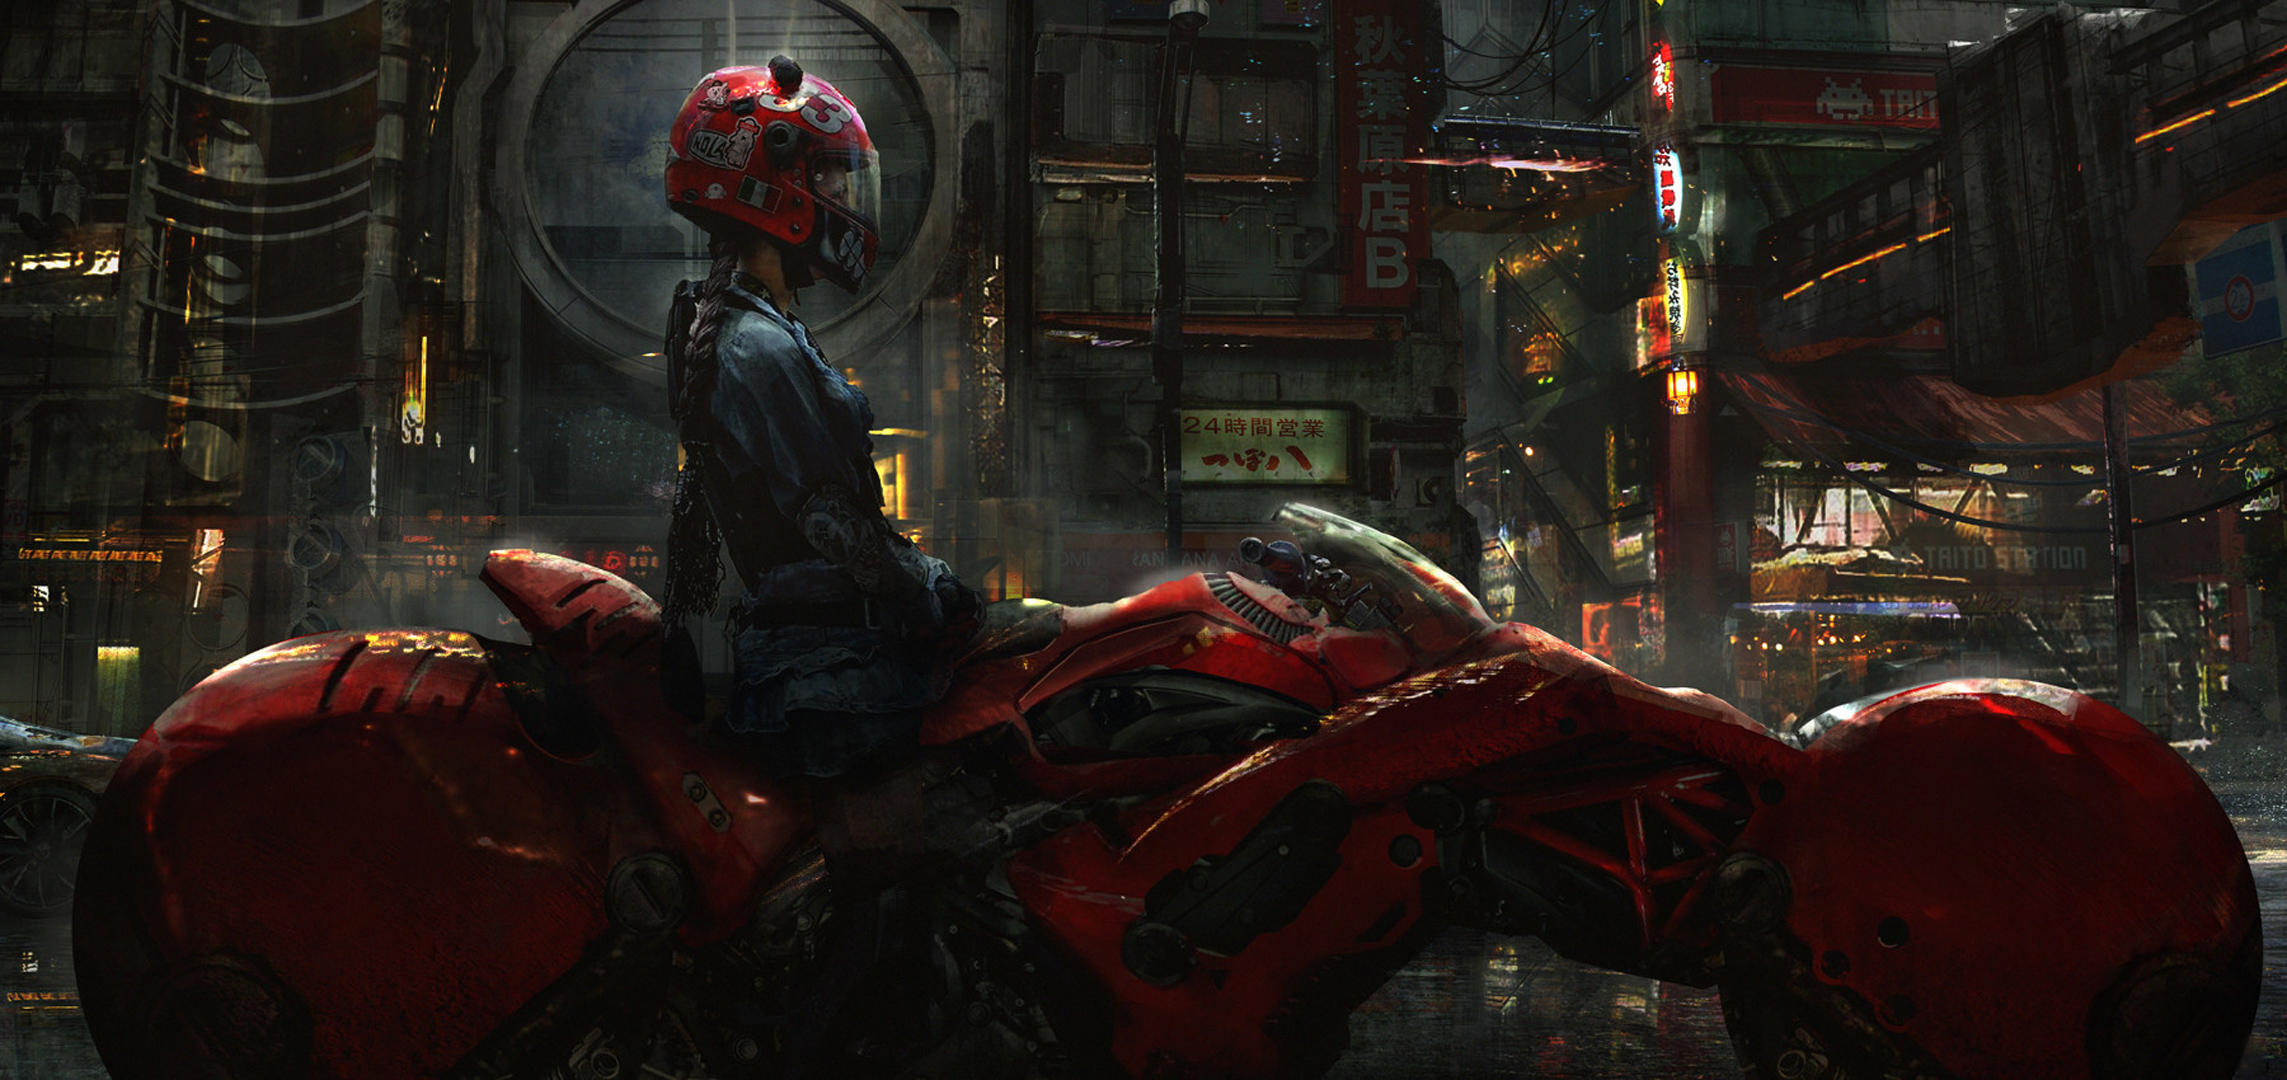 Biker Cyberpunk Girl Scifi Hd Artist 4k Wallpapers Images Backgrounds Photos And Pictures 0273